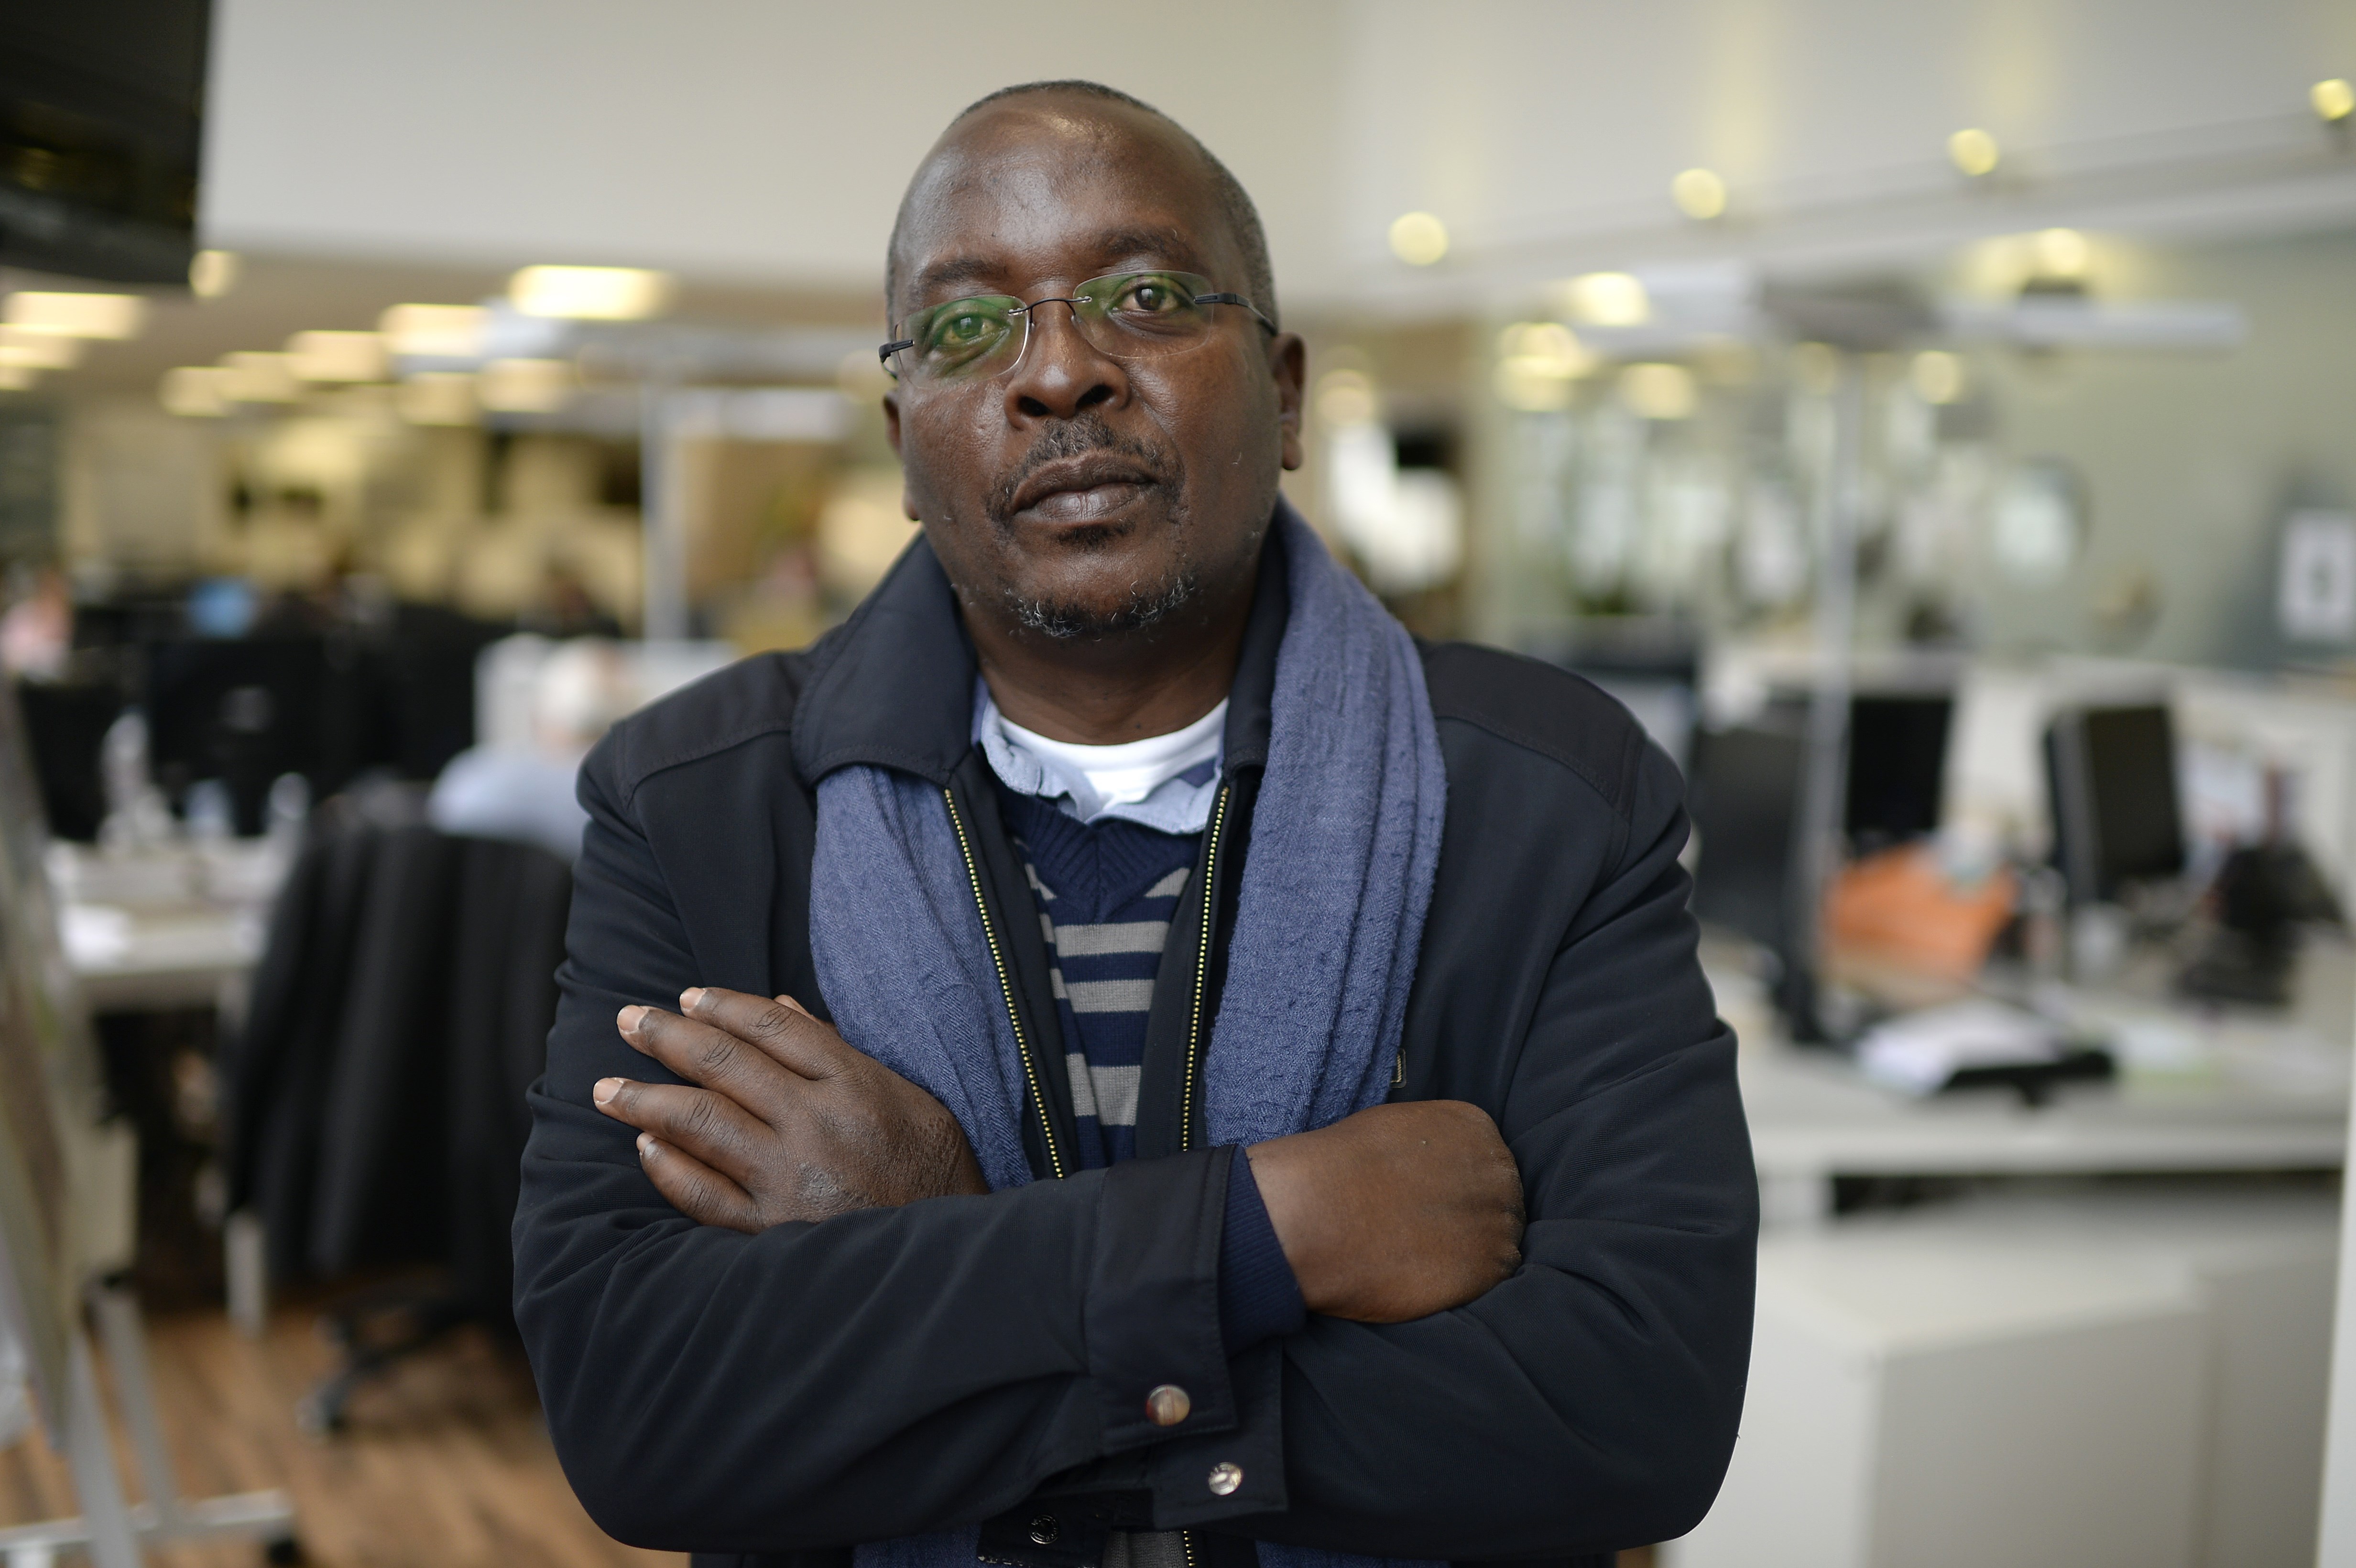 Burundi-based AFP journalist Esdras Ndikumana poses at the Agence France-Presse (AFP) headquarters in Paris on October 19, 2015. Ndikumana, 54, was taking pictures at the scene of the assassination of a top general in the capital Bujumbura on August 2, when he was arrested by members of the National Intelligence Service (SNR). He was held for around two hours, during which he was subjected to severe beatings on his back, legs and the soles of his feet. AFP PHOTO / MIGUEL MEDINA        (Photo credit should read MIGUEL MEDINA/AFP/Getty Images)